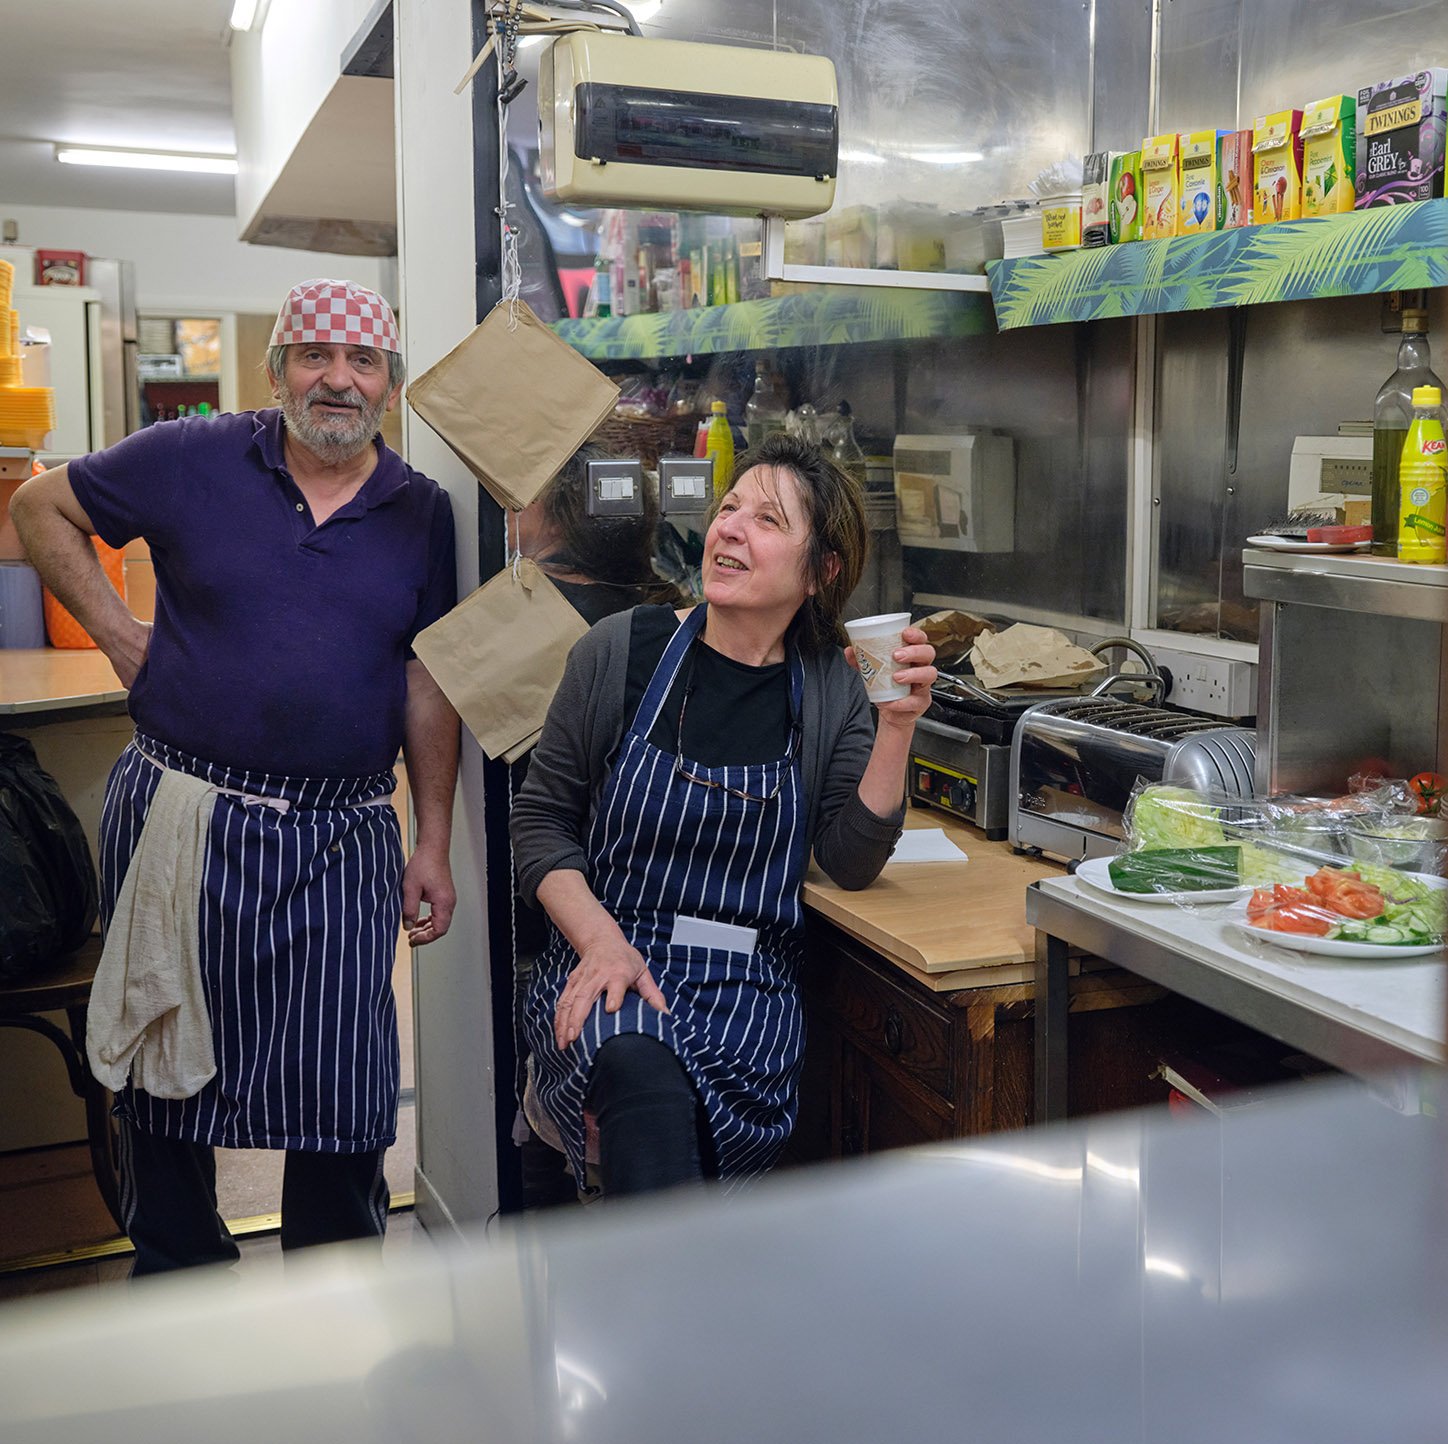 A Day in the Life of a The Hope Workers Cafe